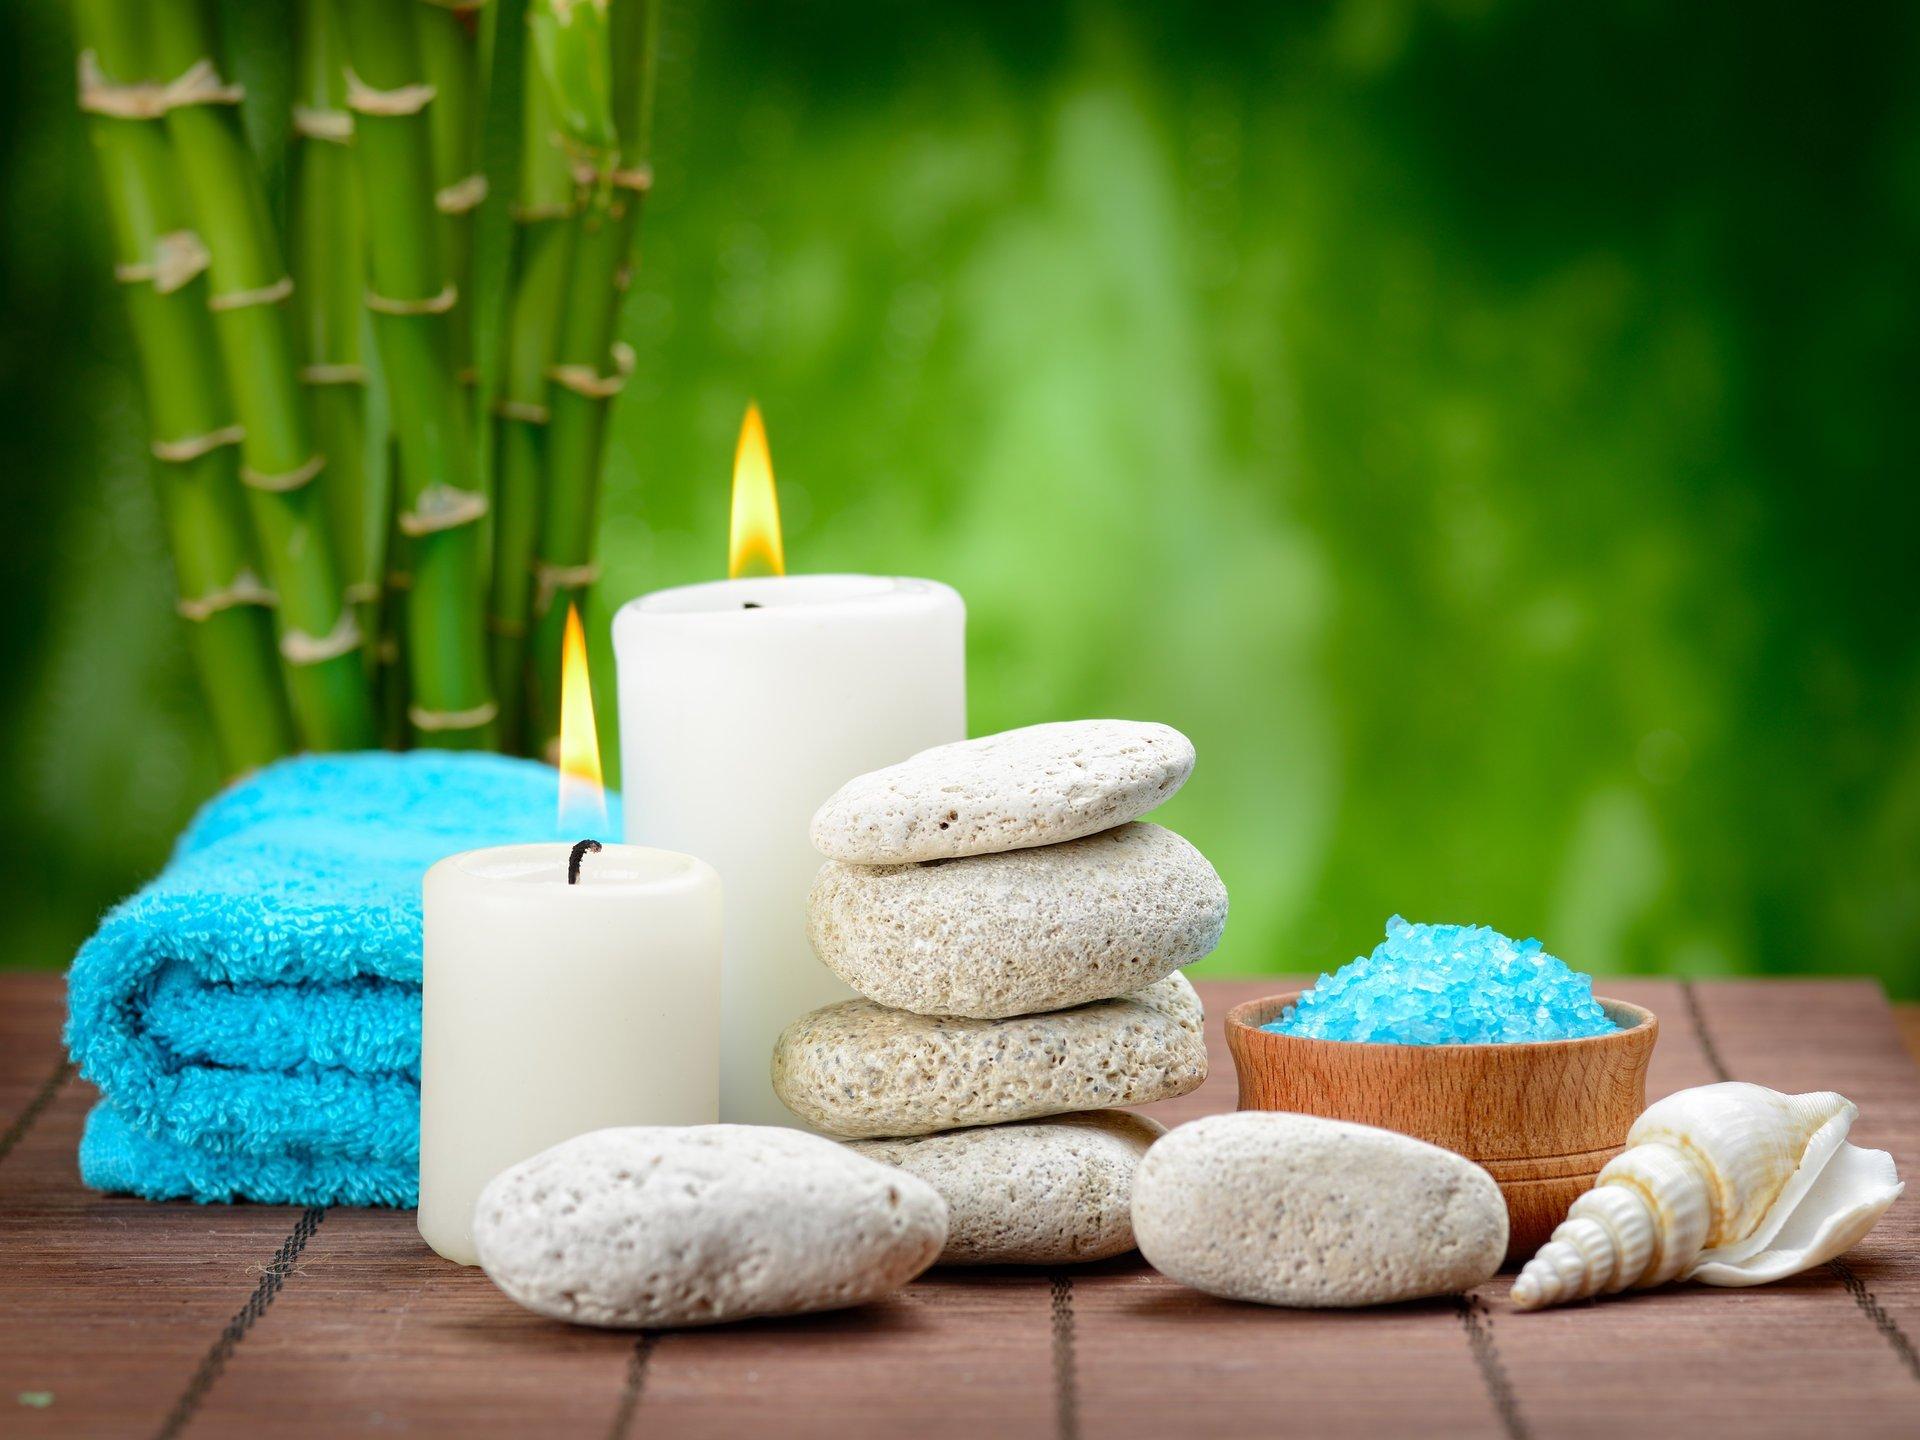 Spa Photos Download The BEST Free Spa Stock Photos  HD Images